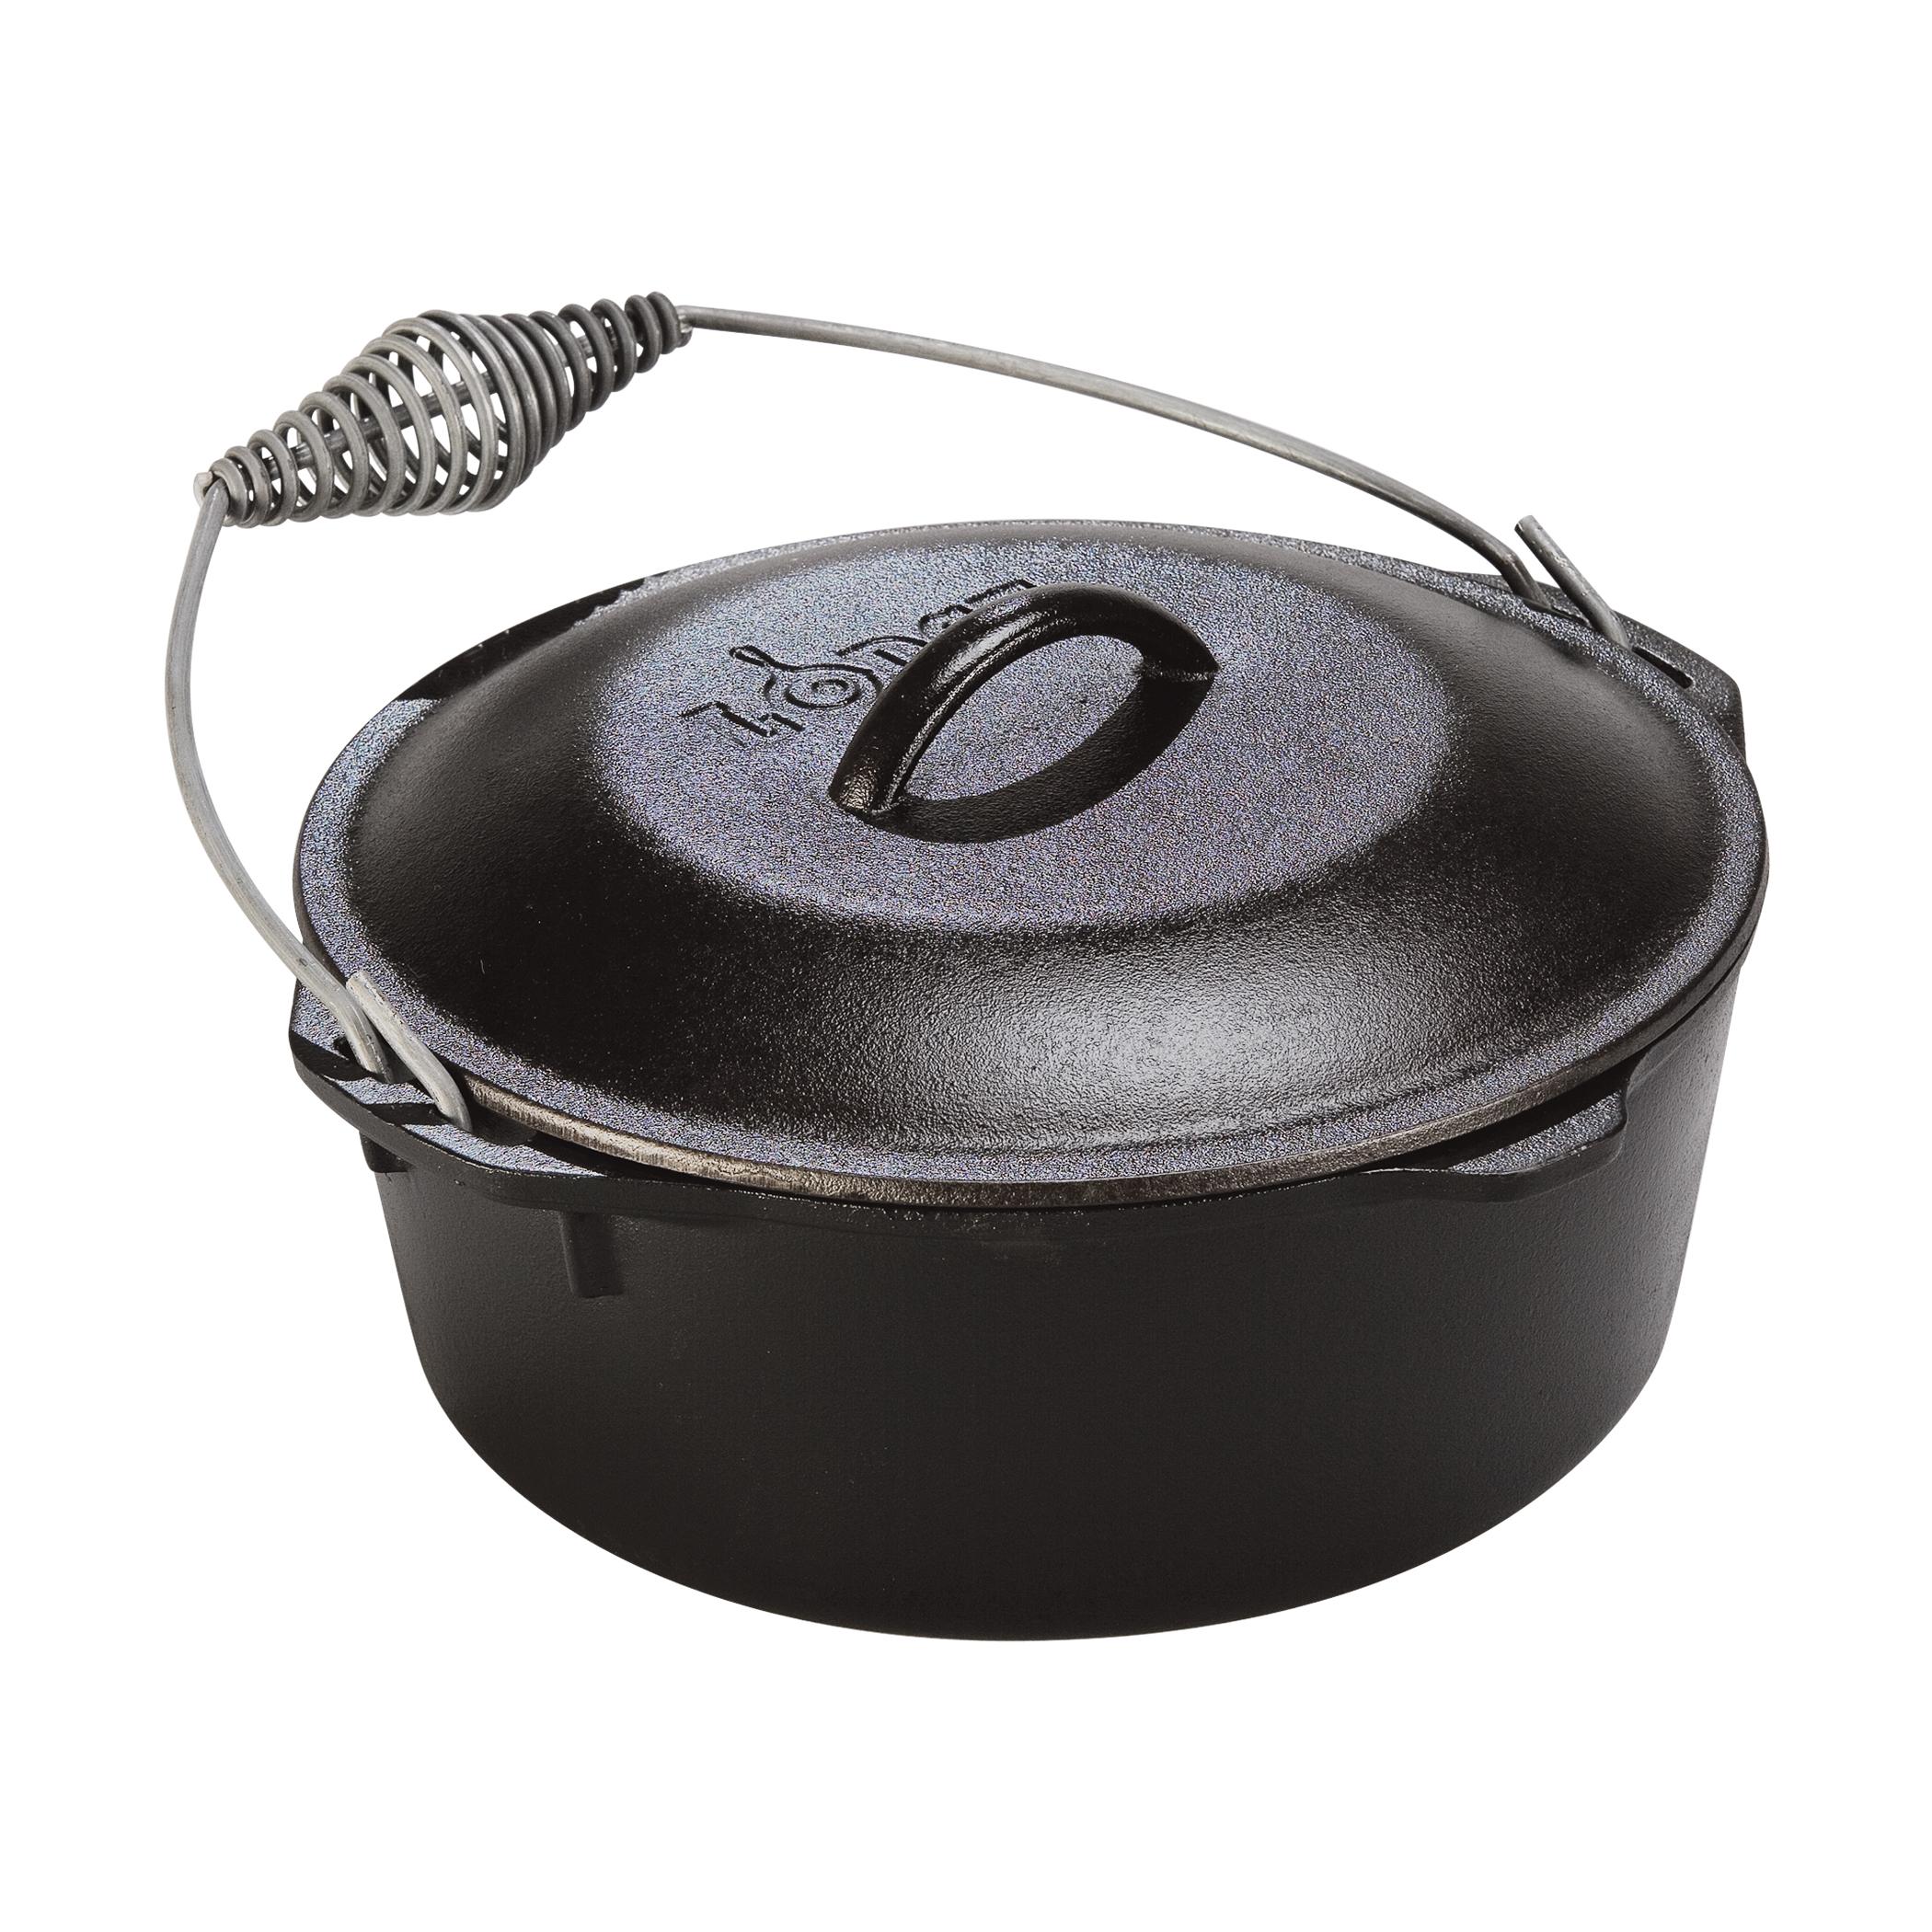  Dutch Oven With Spiral Bail & Iron Cover - 5 Quart